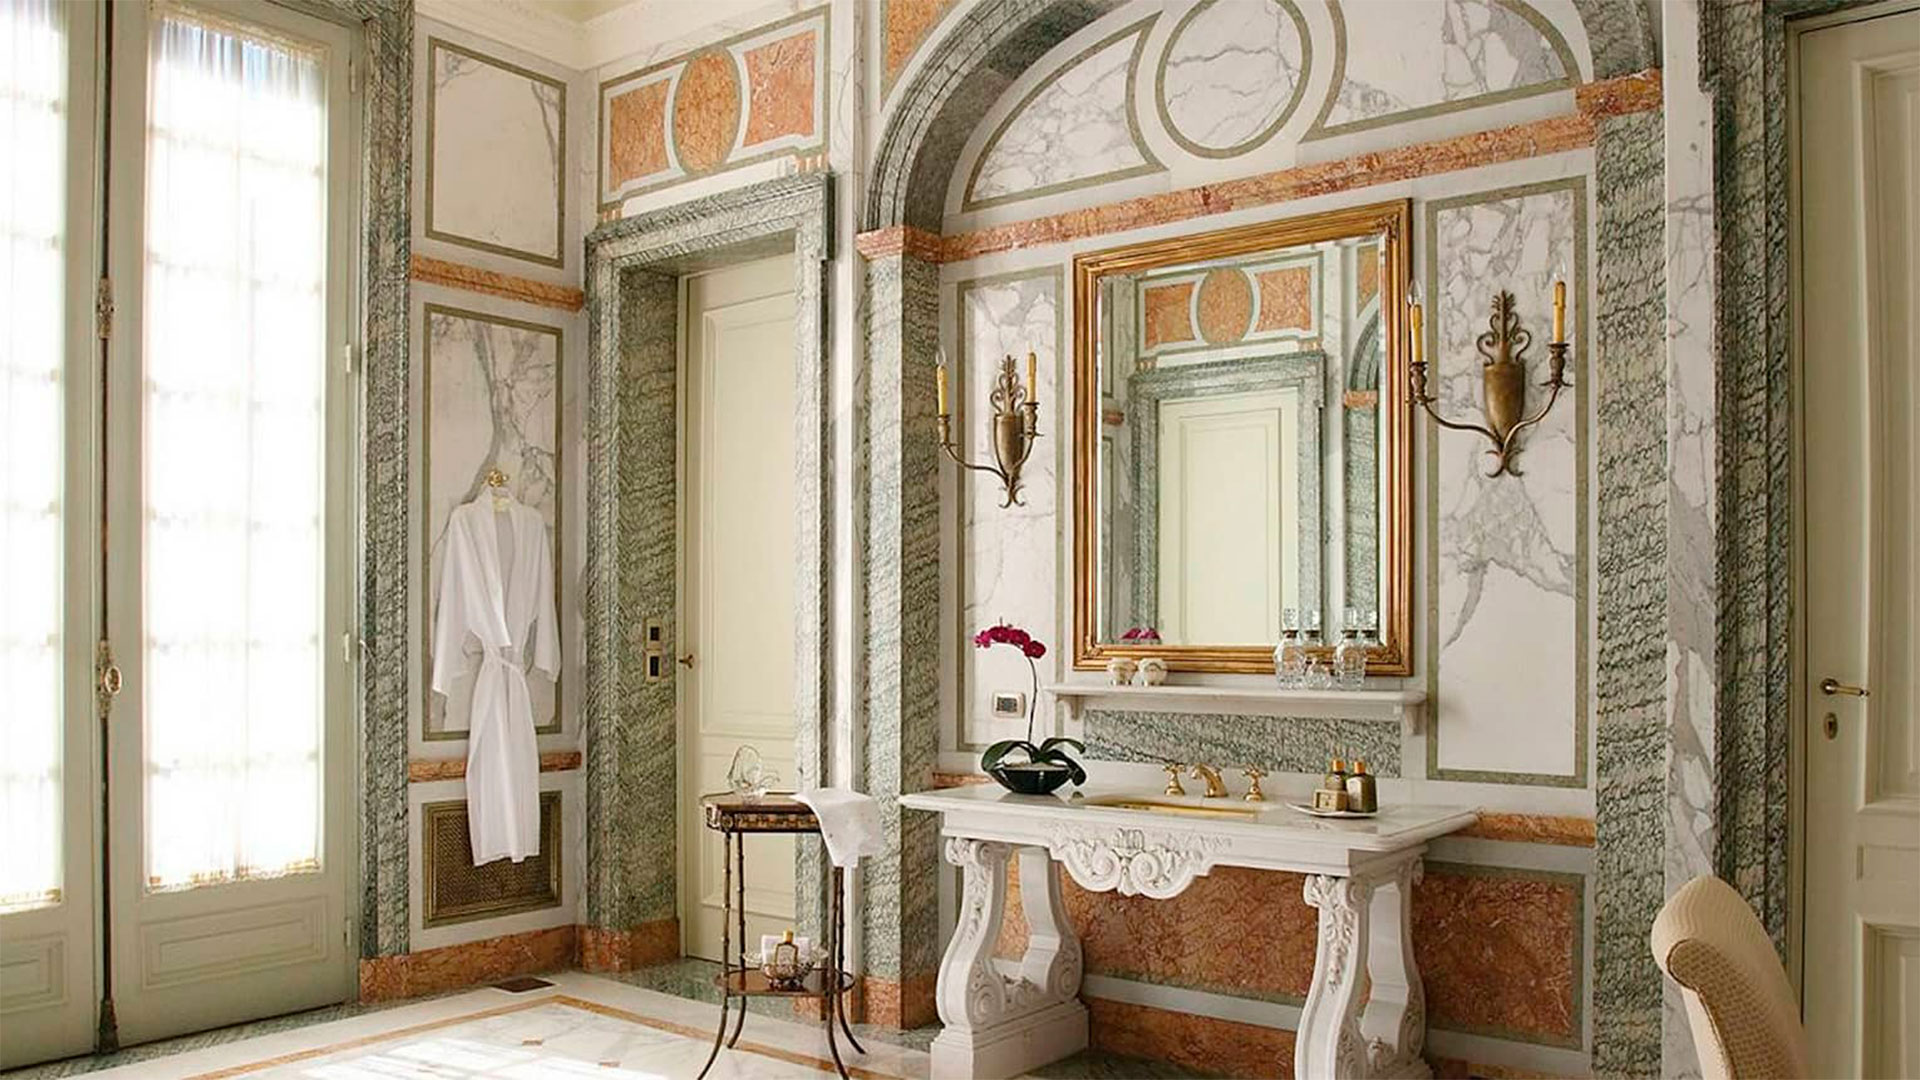 The bathroom is 30 meters long and covered in Italian marble with solid gold taps